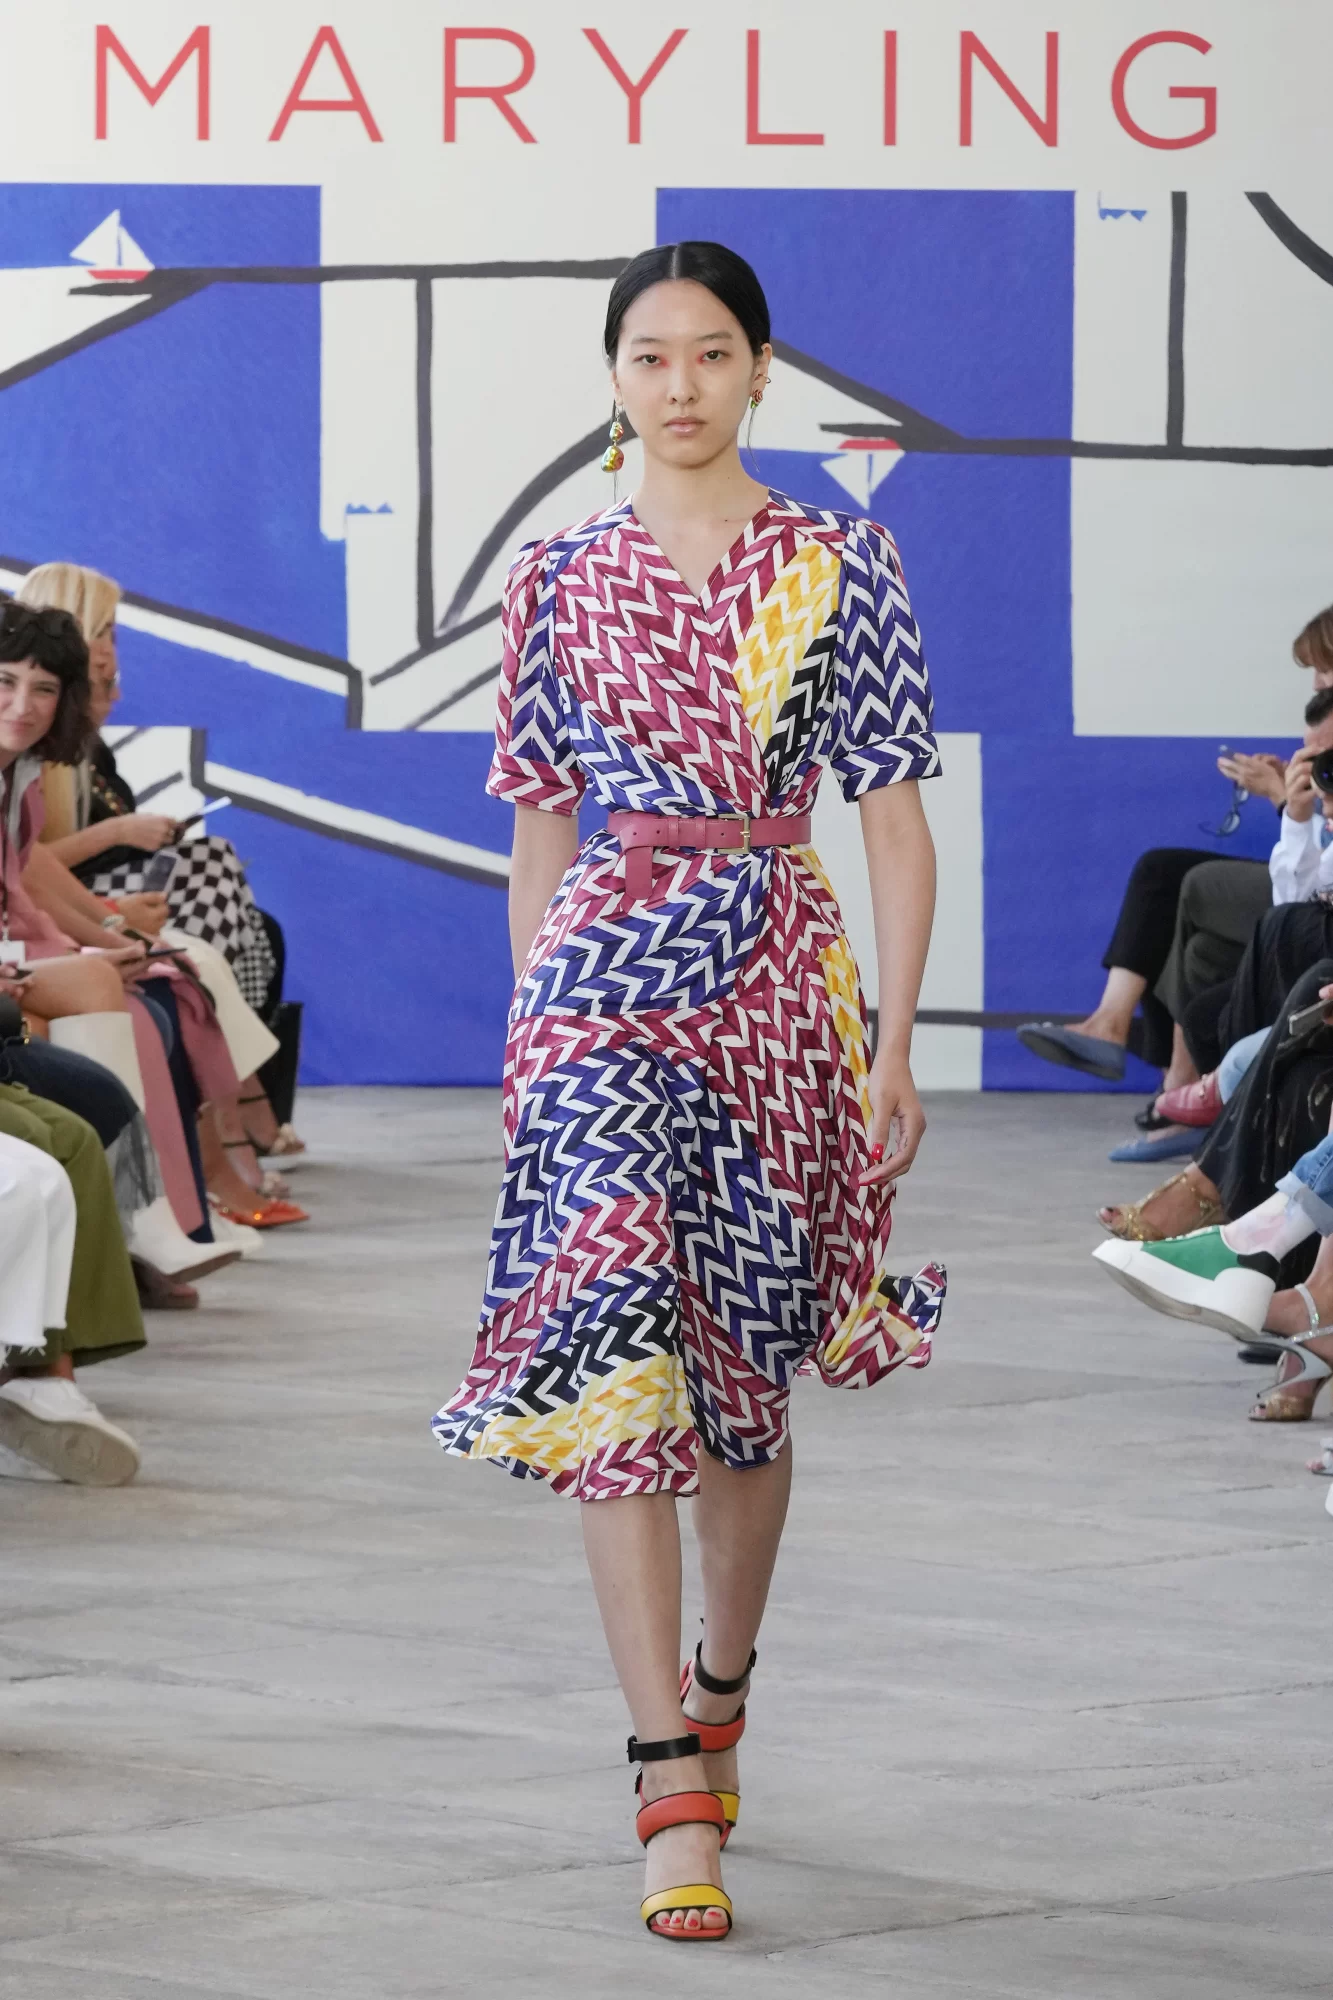 MARYLING’s Spring/Summer 2022 collection reinterprets the nautical mood ...